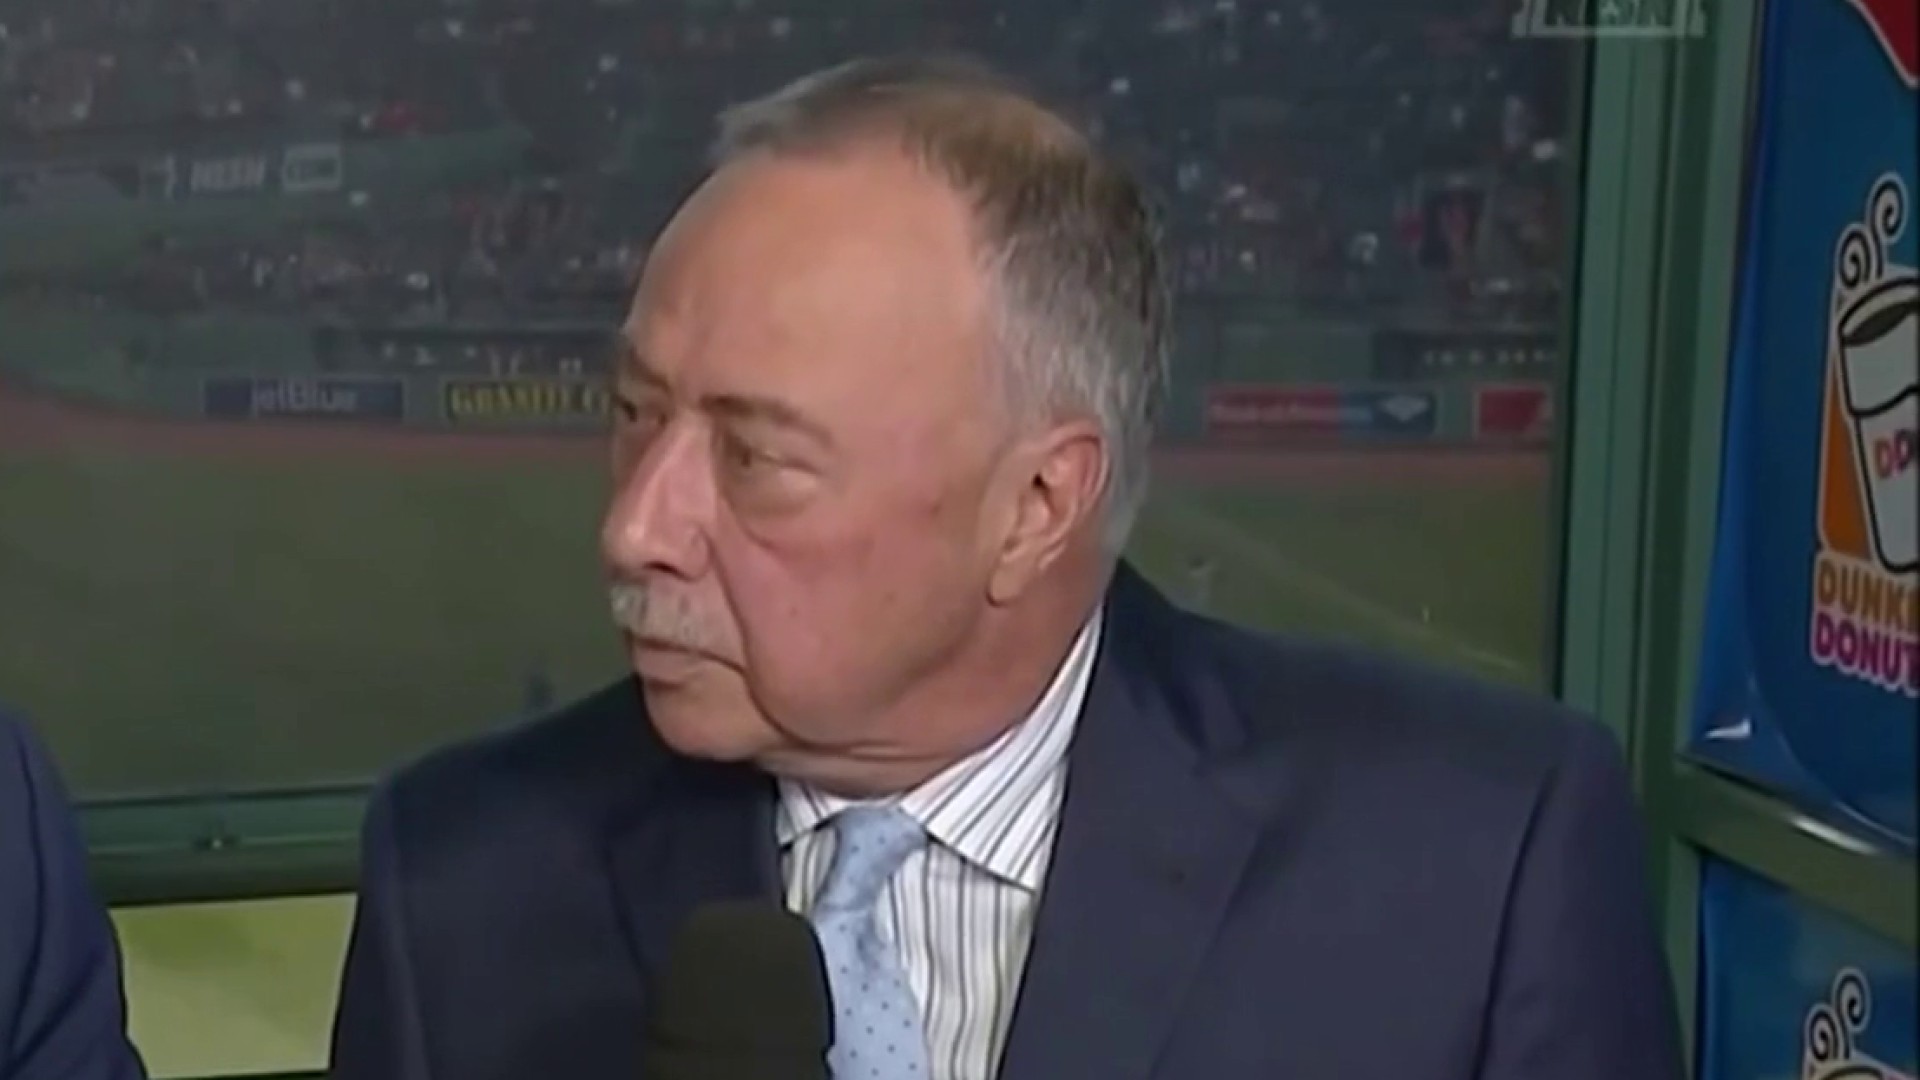 Jerry Remy to Be Honored by Red Sox – NBC Boston